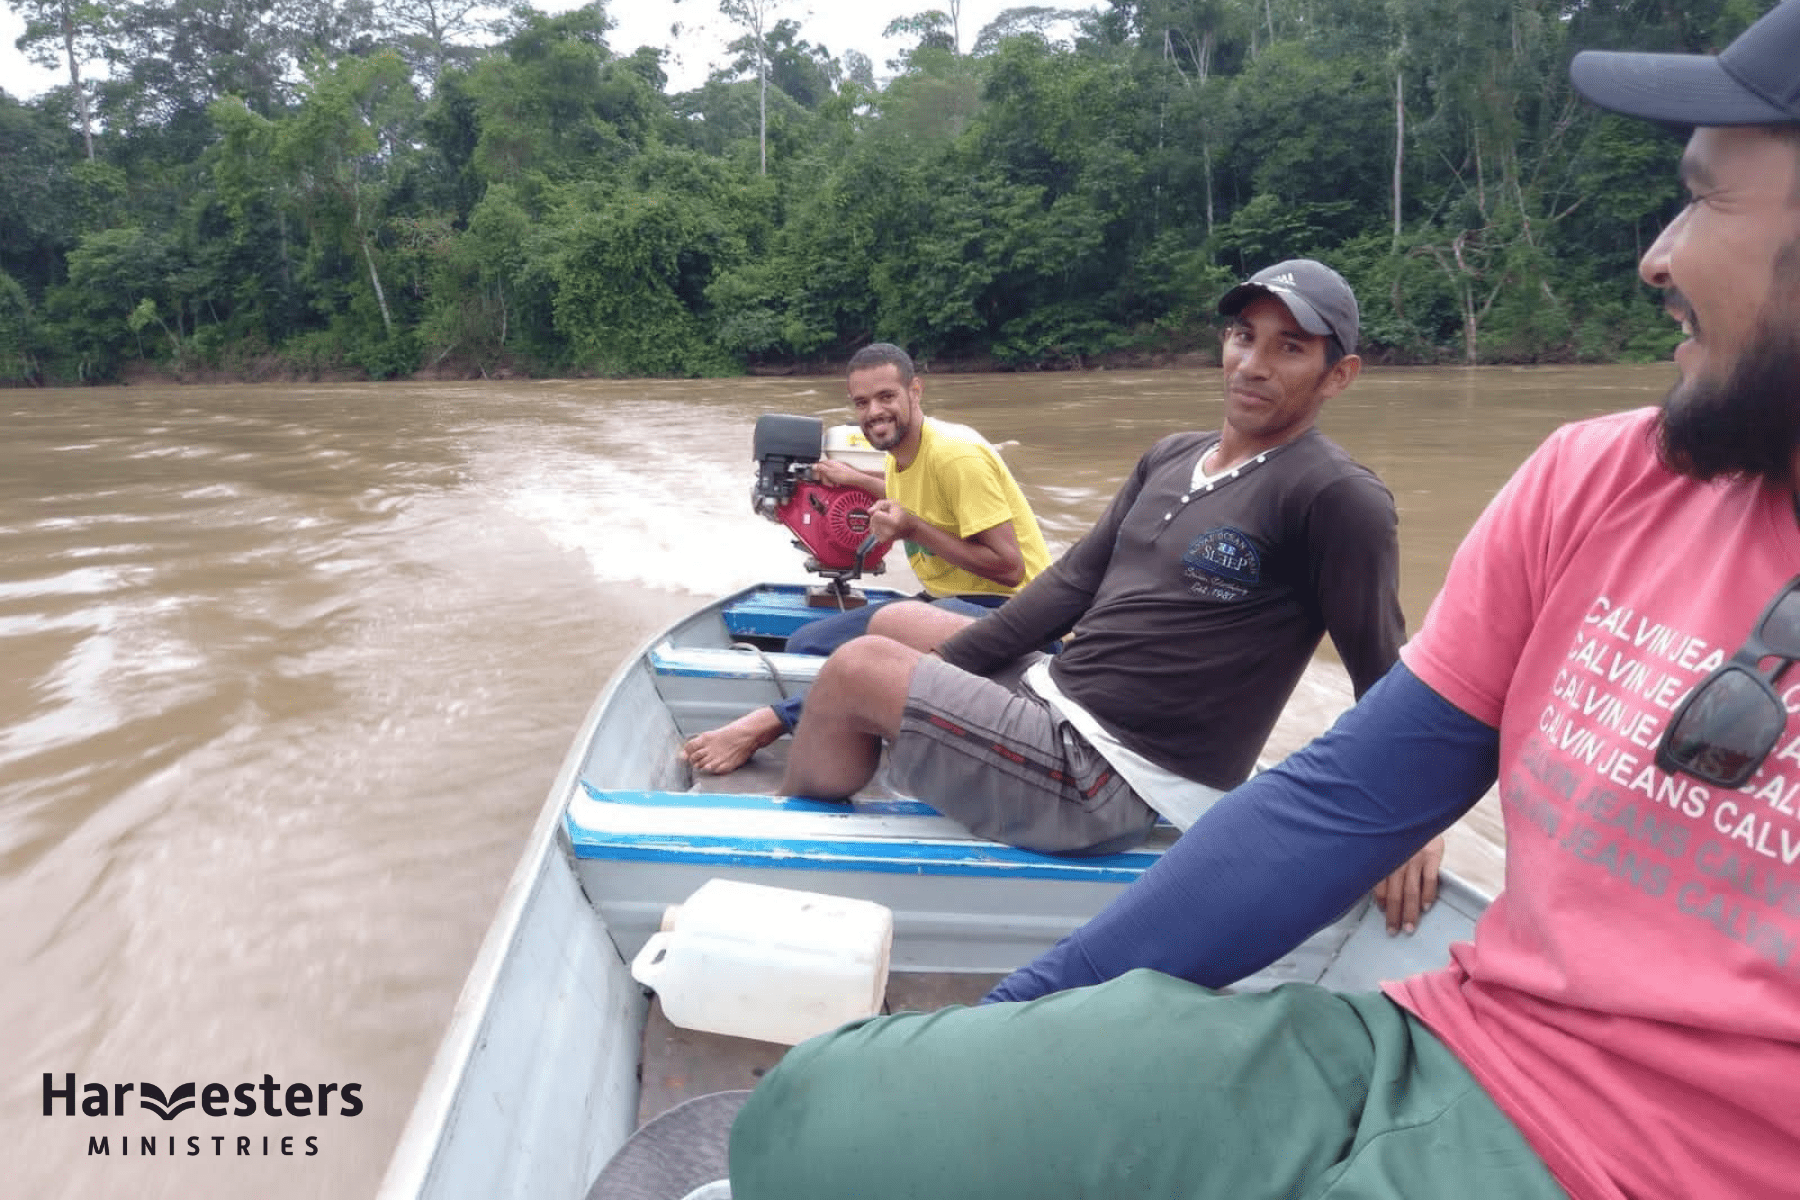 Ps Marcos (back) and fellow believers travelling the Amazon River. Harvesters Ministries.